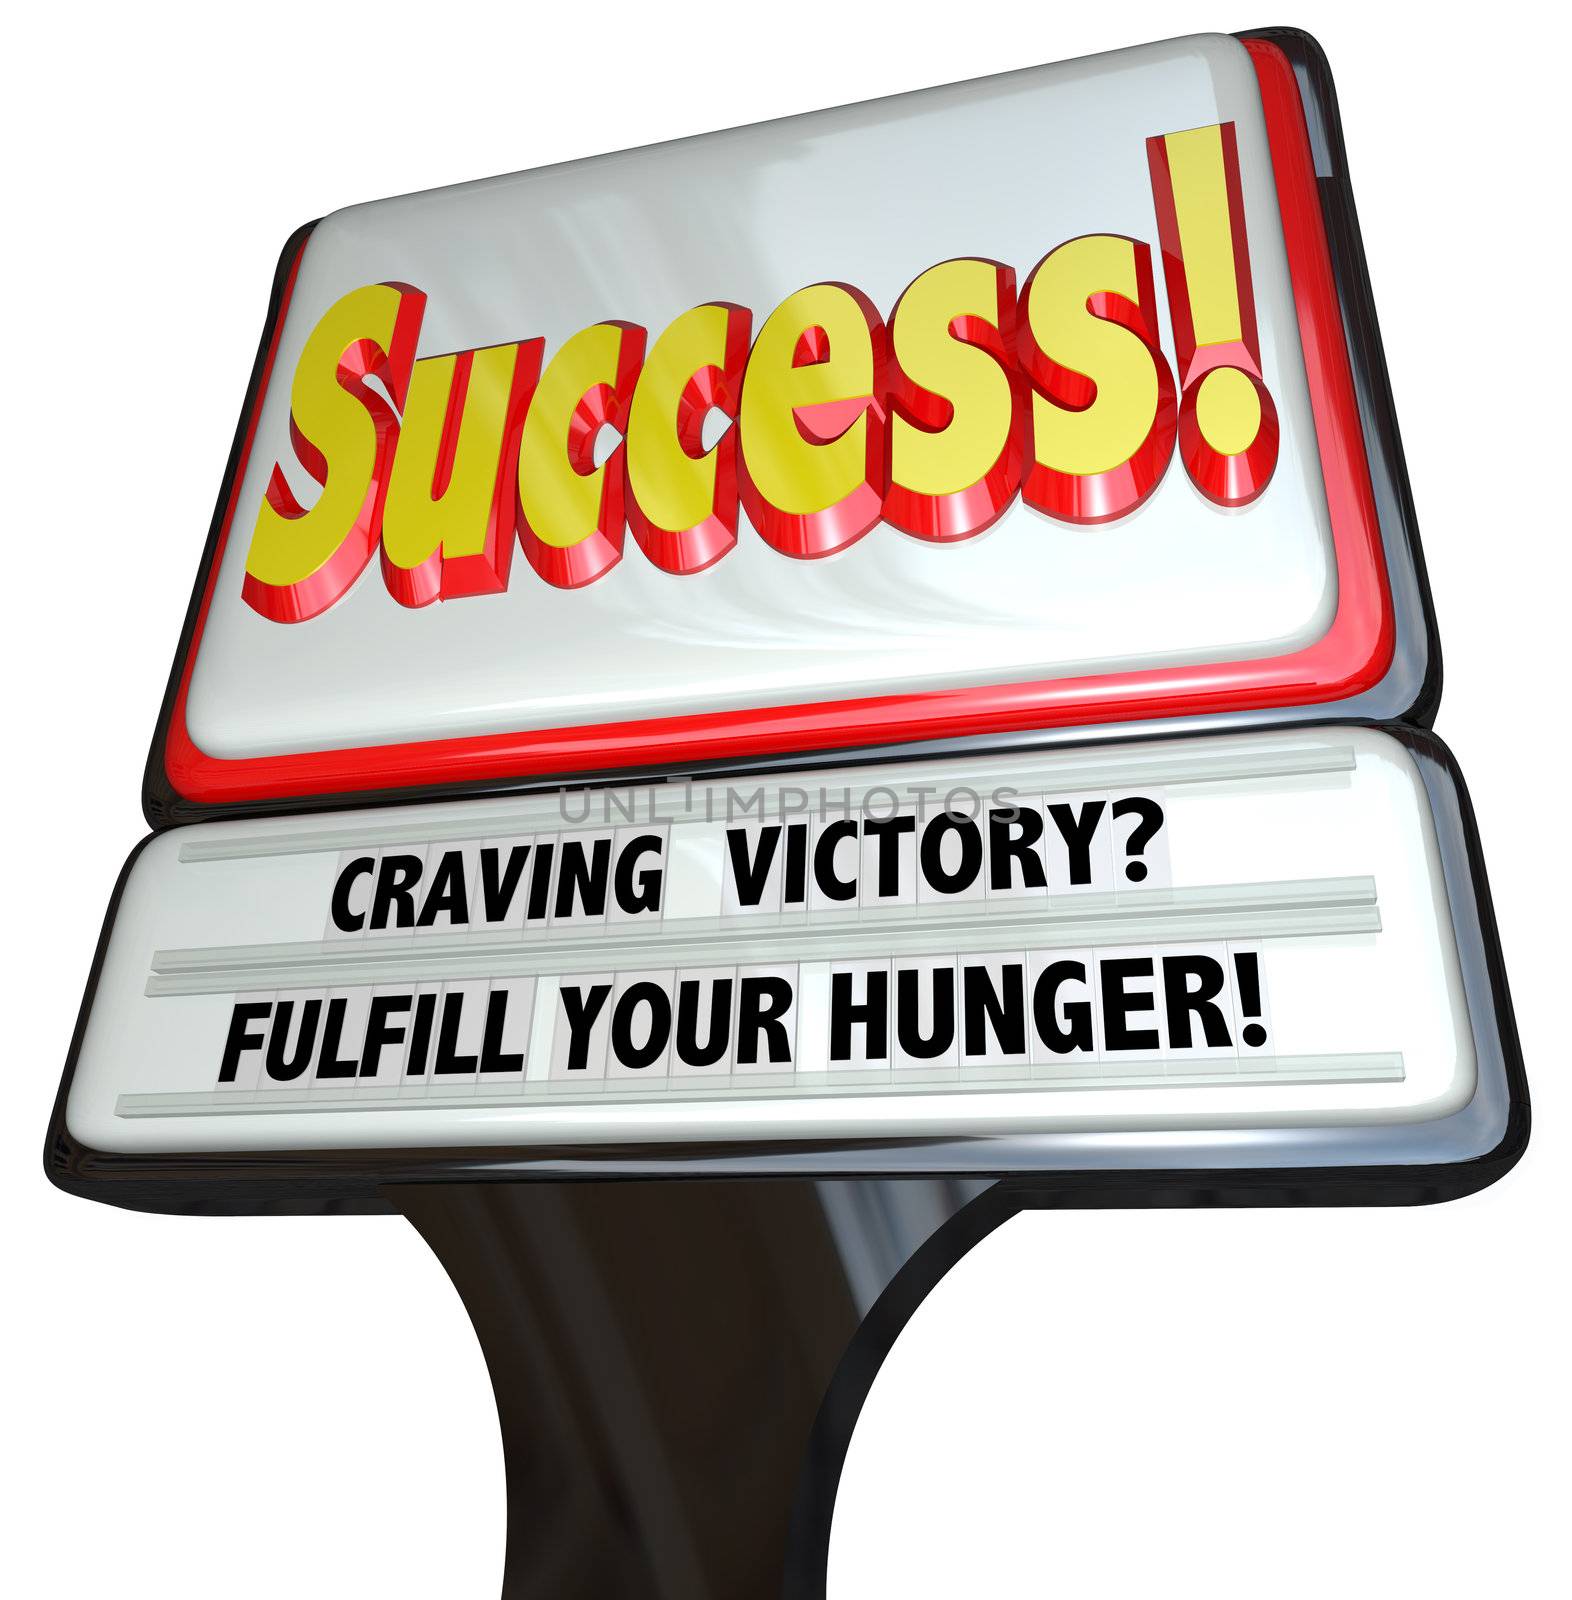 A fast food restaurant sign with the word Success in big letters with a message in changable letters reading Craving Victory? Fulfill Your Hunger